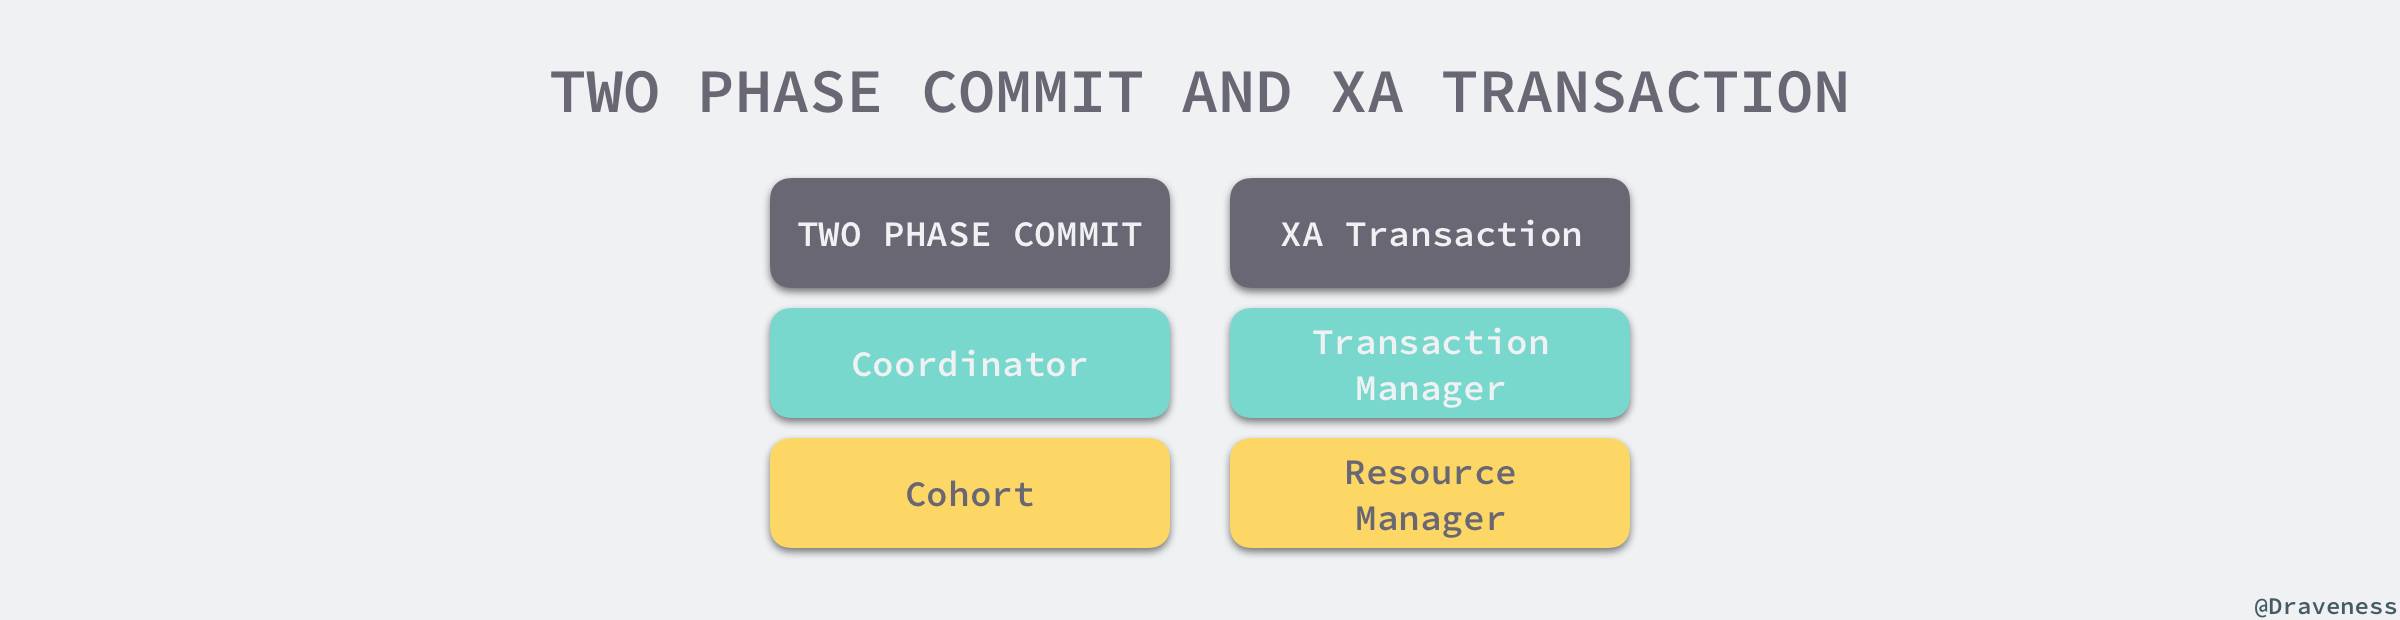 two-phase-commit-and-xa-transaction